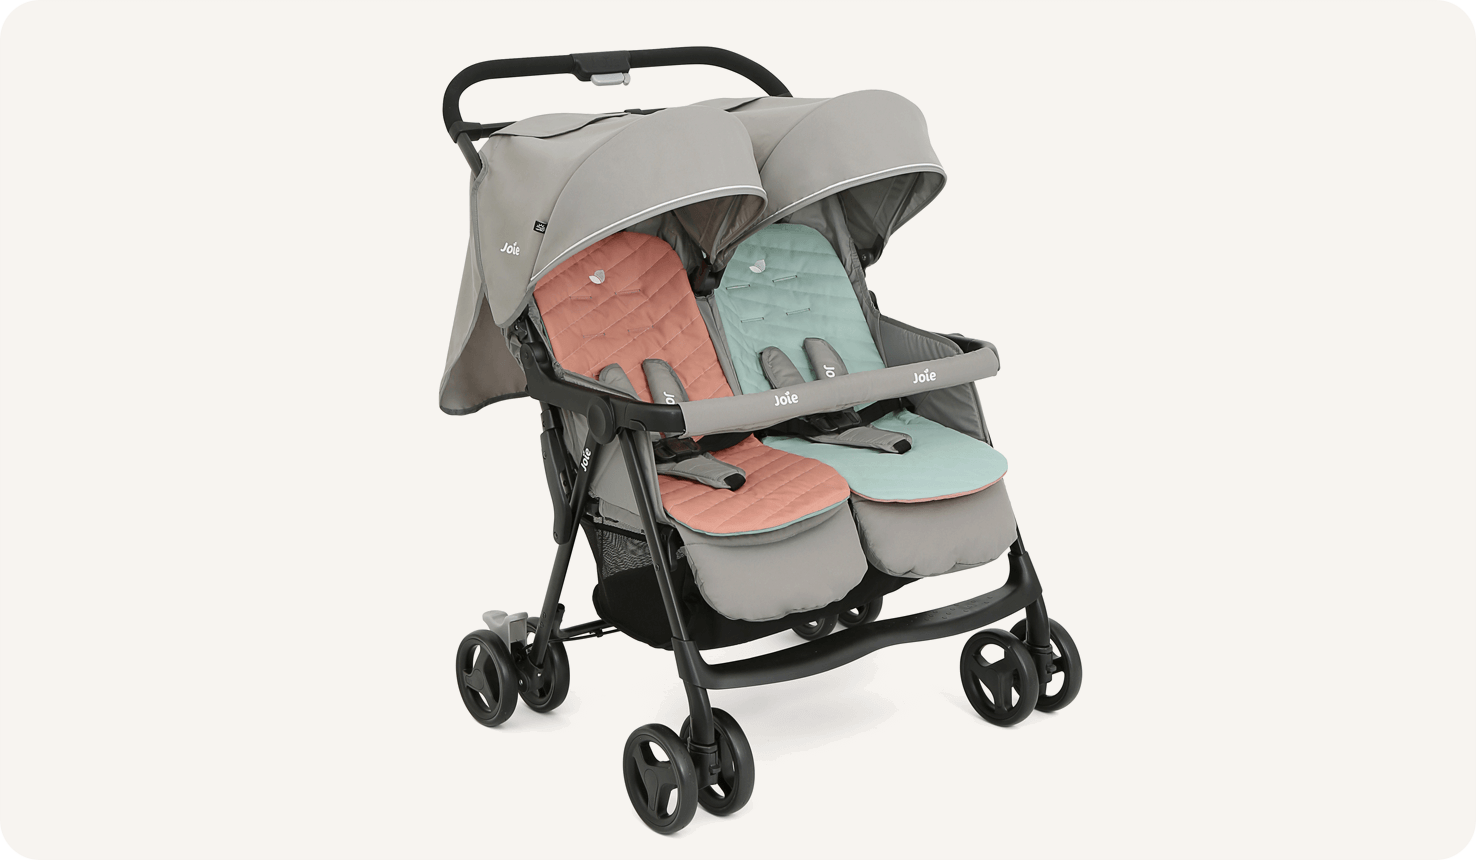 The Joie Aire Twin side-by-side double stroller in light gray at an angle, with a peach coloured seat insert on the left seat and a light blue insert on the right seat